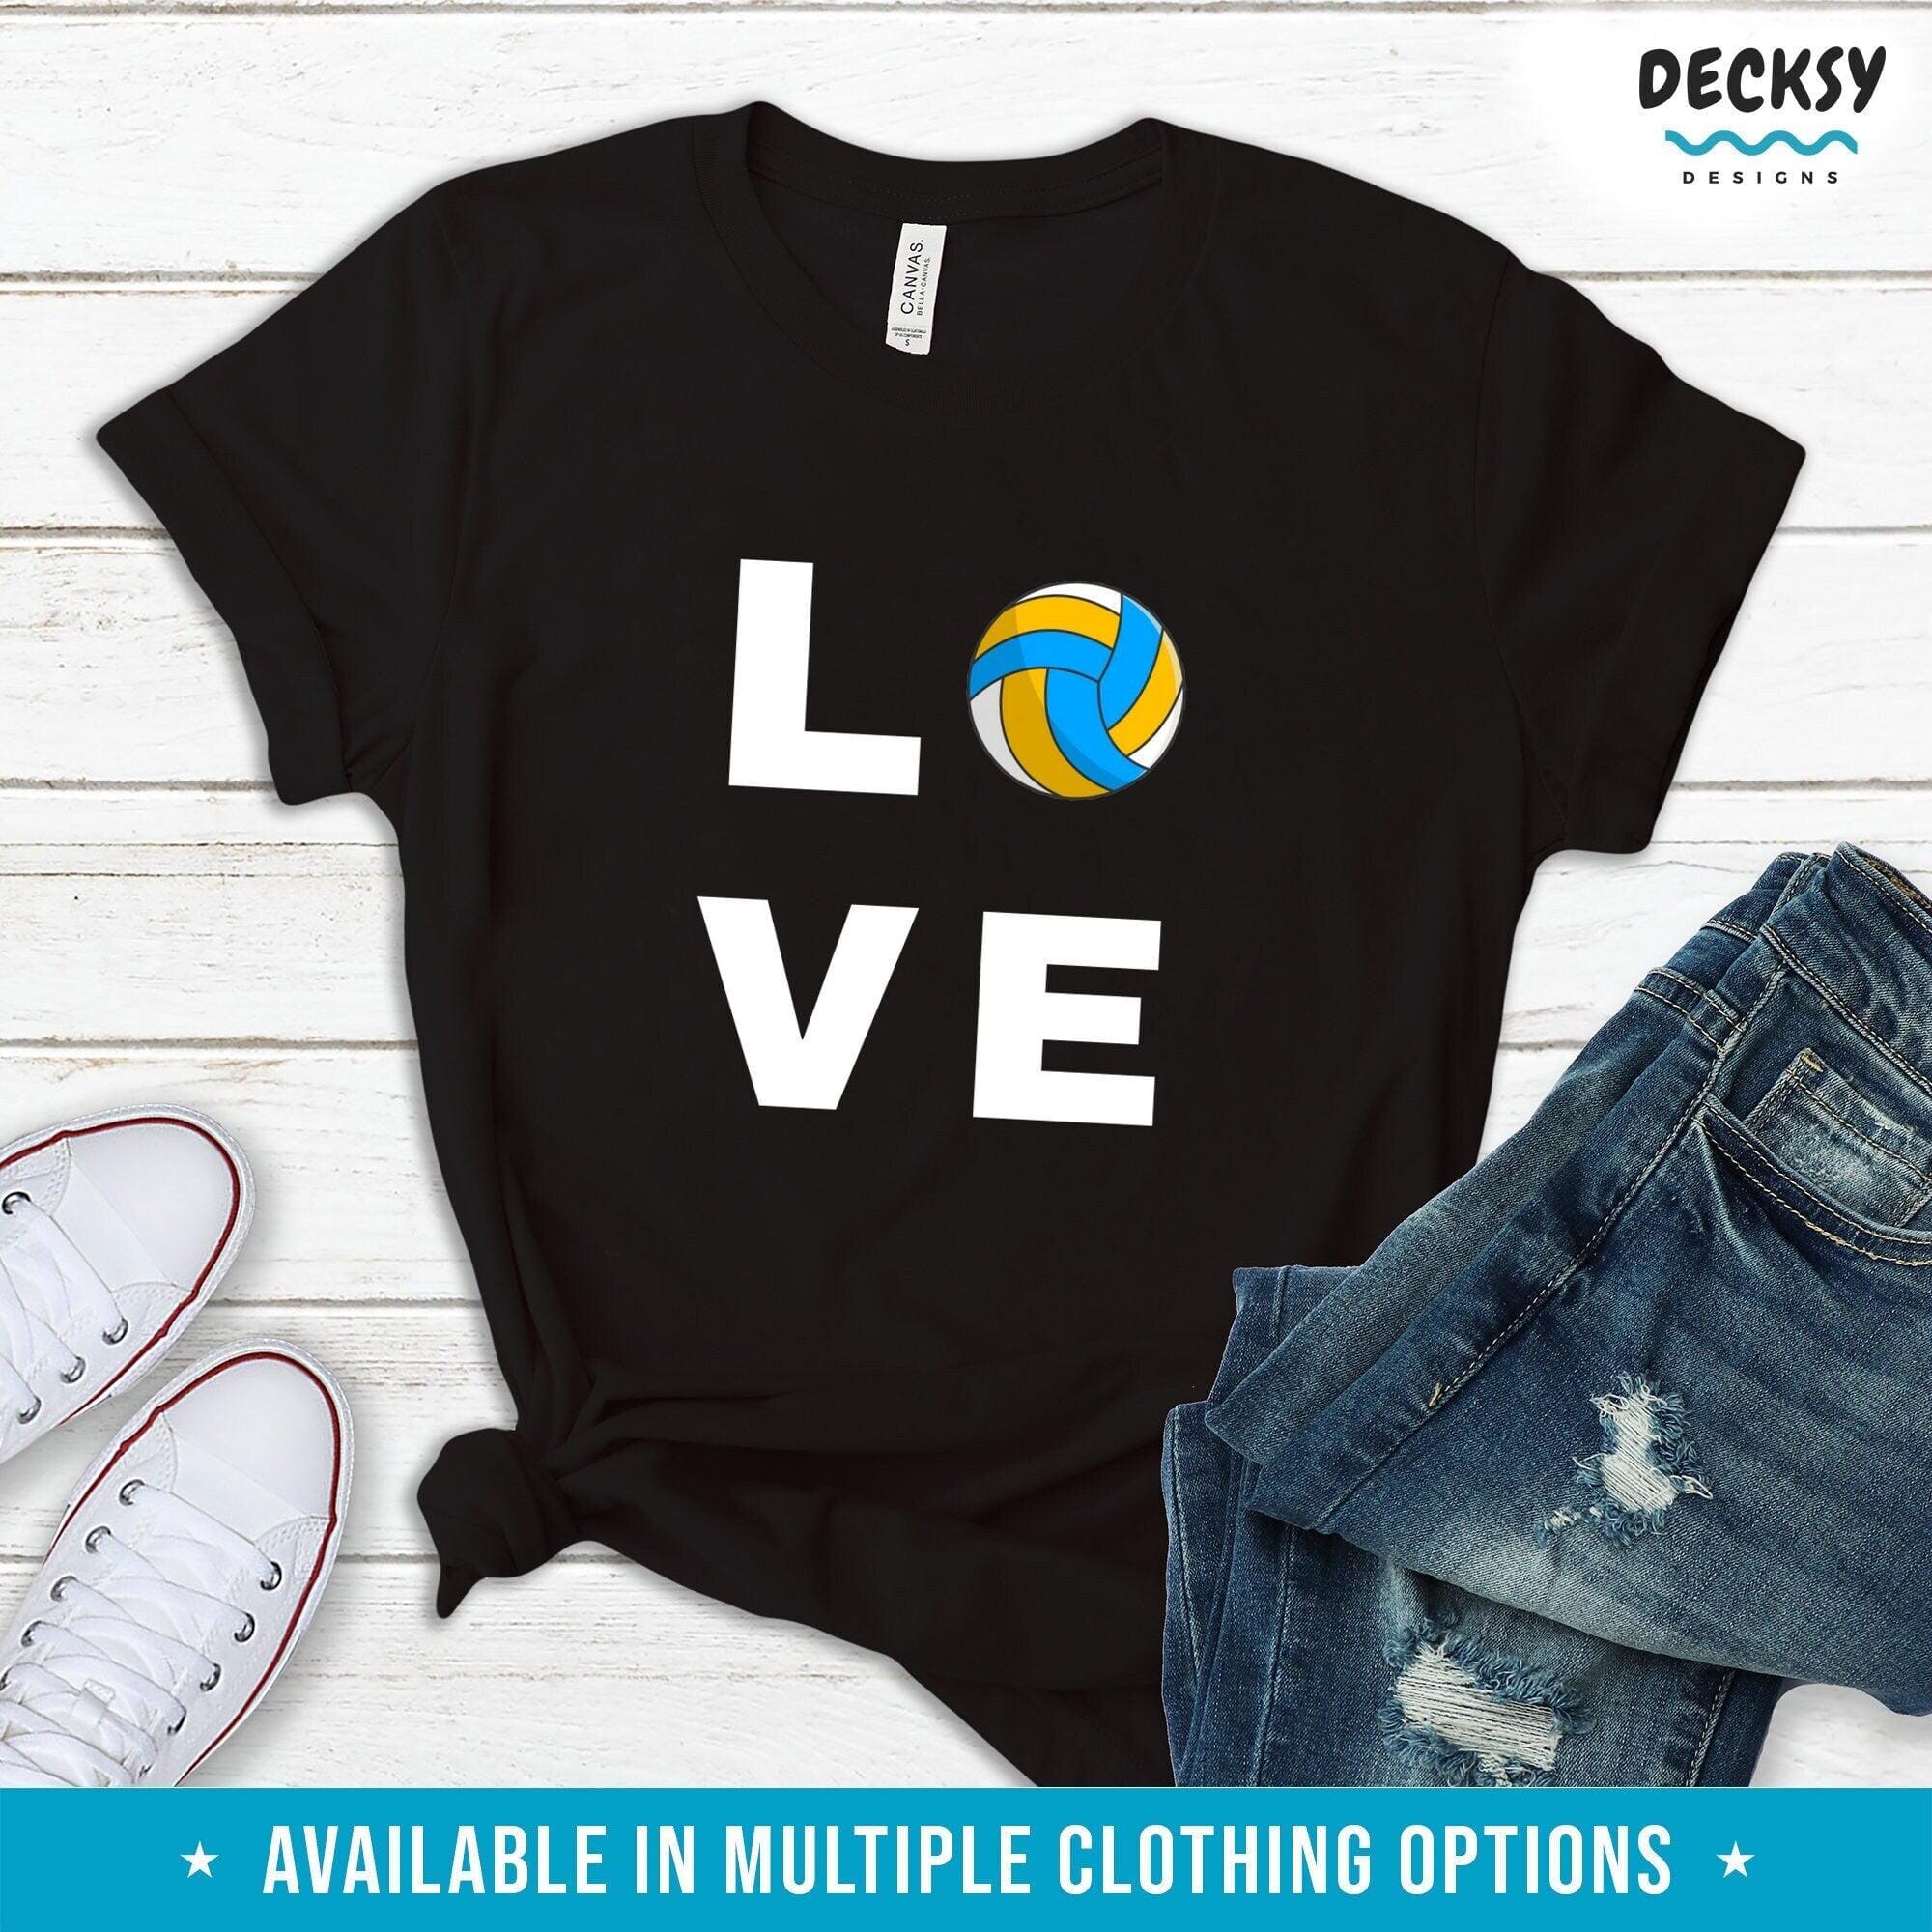 Volleyball Love Shirt, Gift for Volleyball Player-Clothing:Gender-Neutral Adult Clothing:Tops & Tees:T-shirts:Graphic Tees-DecksyDesigns